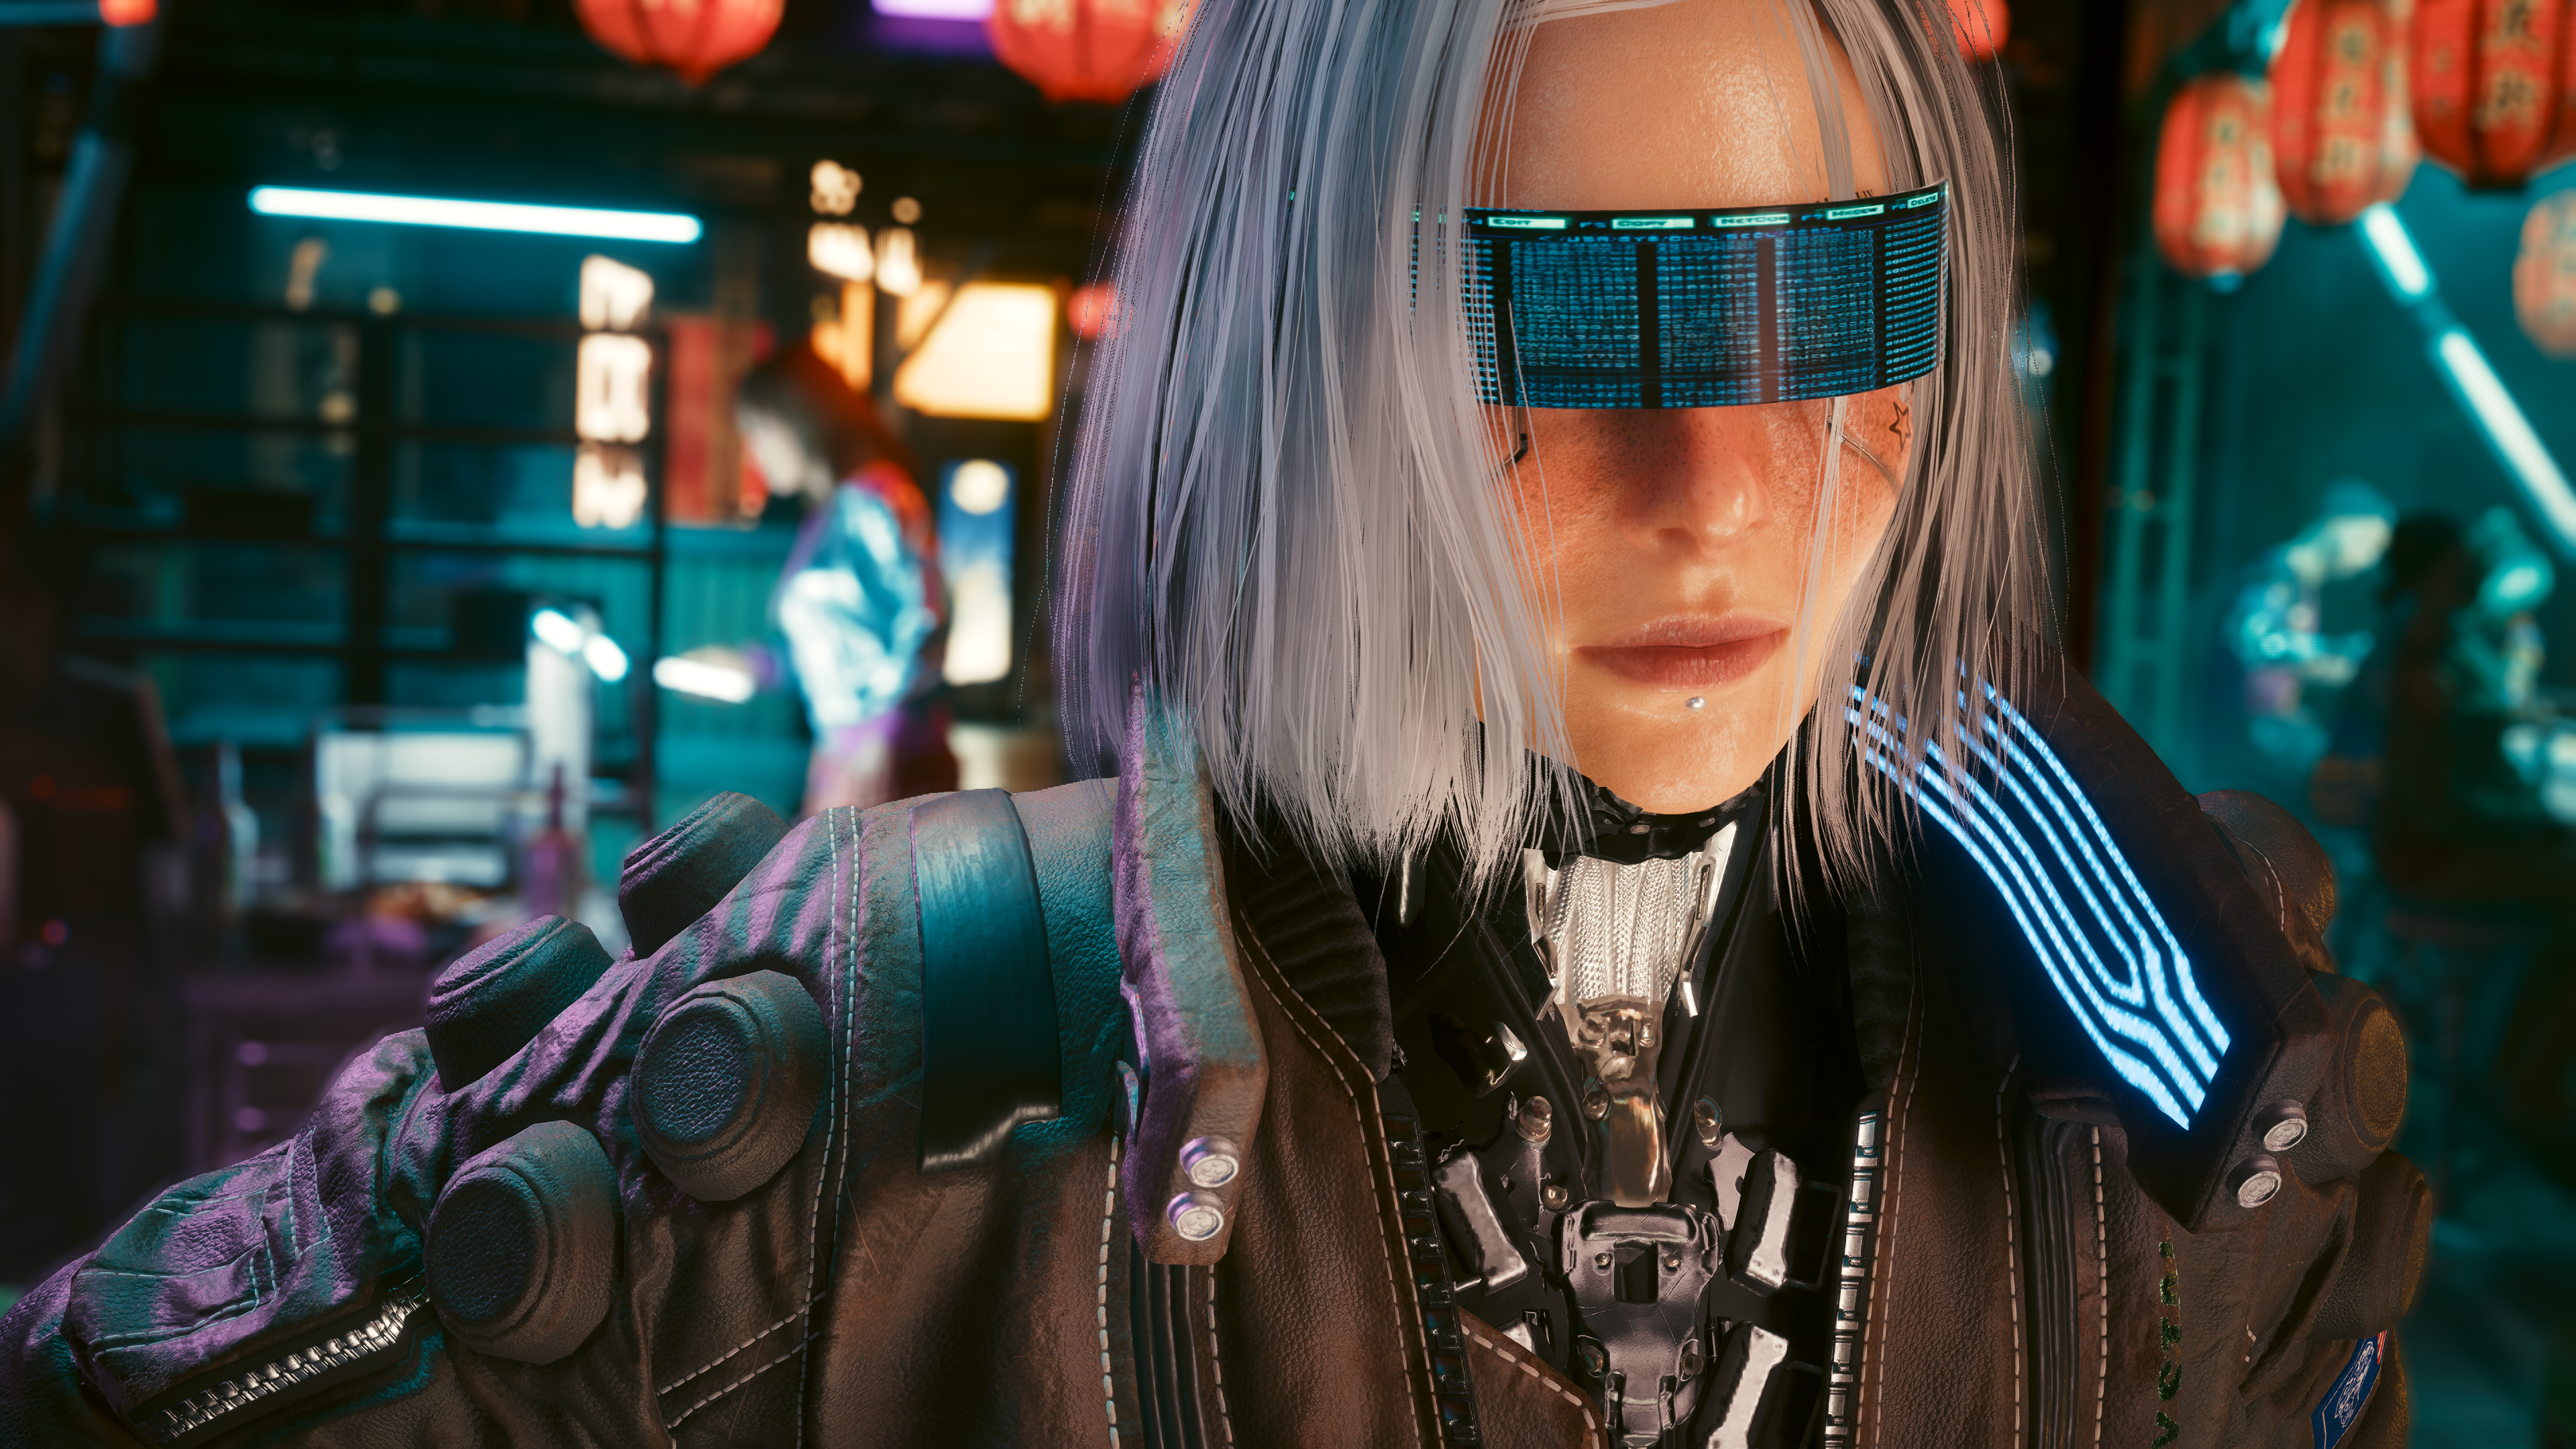 Kinda Funny on X: Watch Andy show off the absolutely STUNNING #RTXOn Ray  Tracing Overdrive Mode in Cyberpunk 2077 LIVE right now on   and  @NVIDIAGeForce  #GeForcePartner  / X